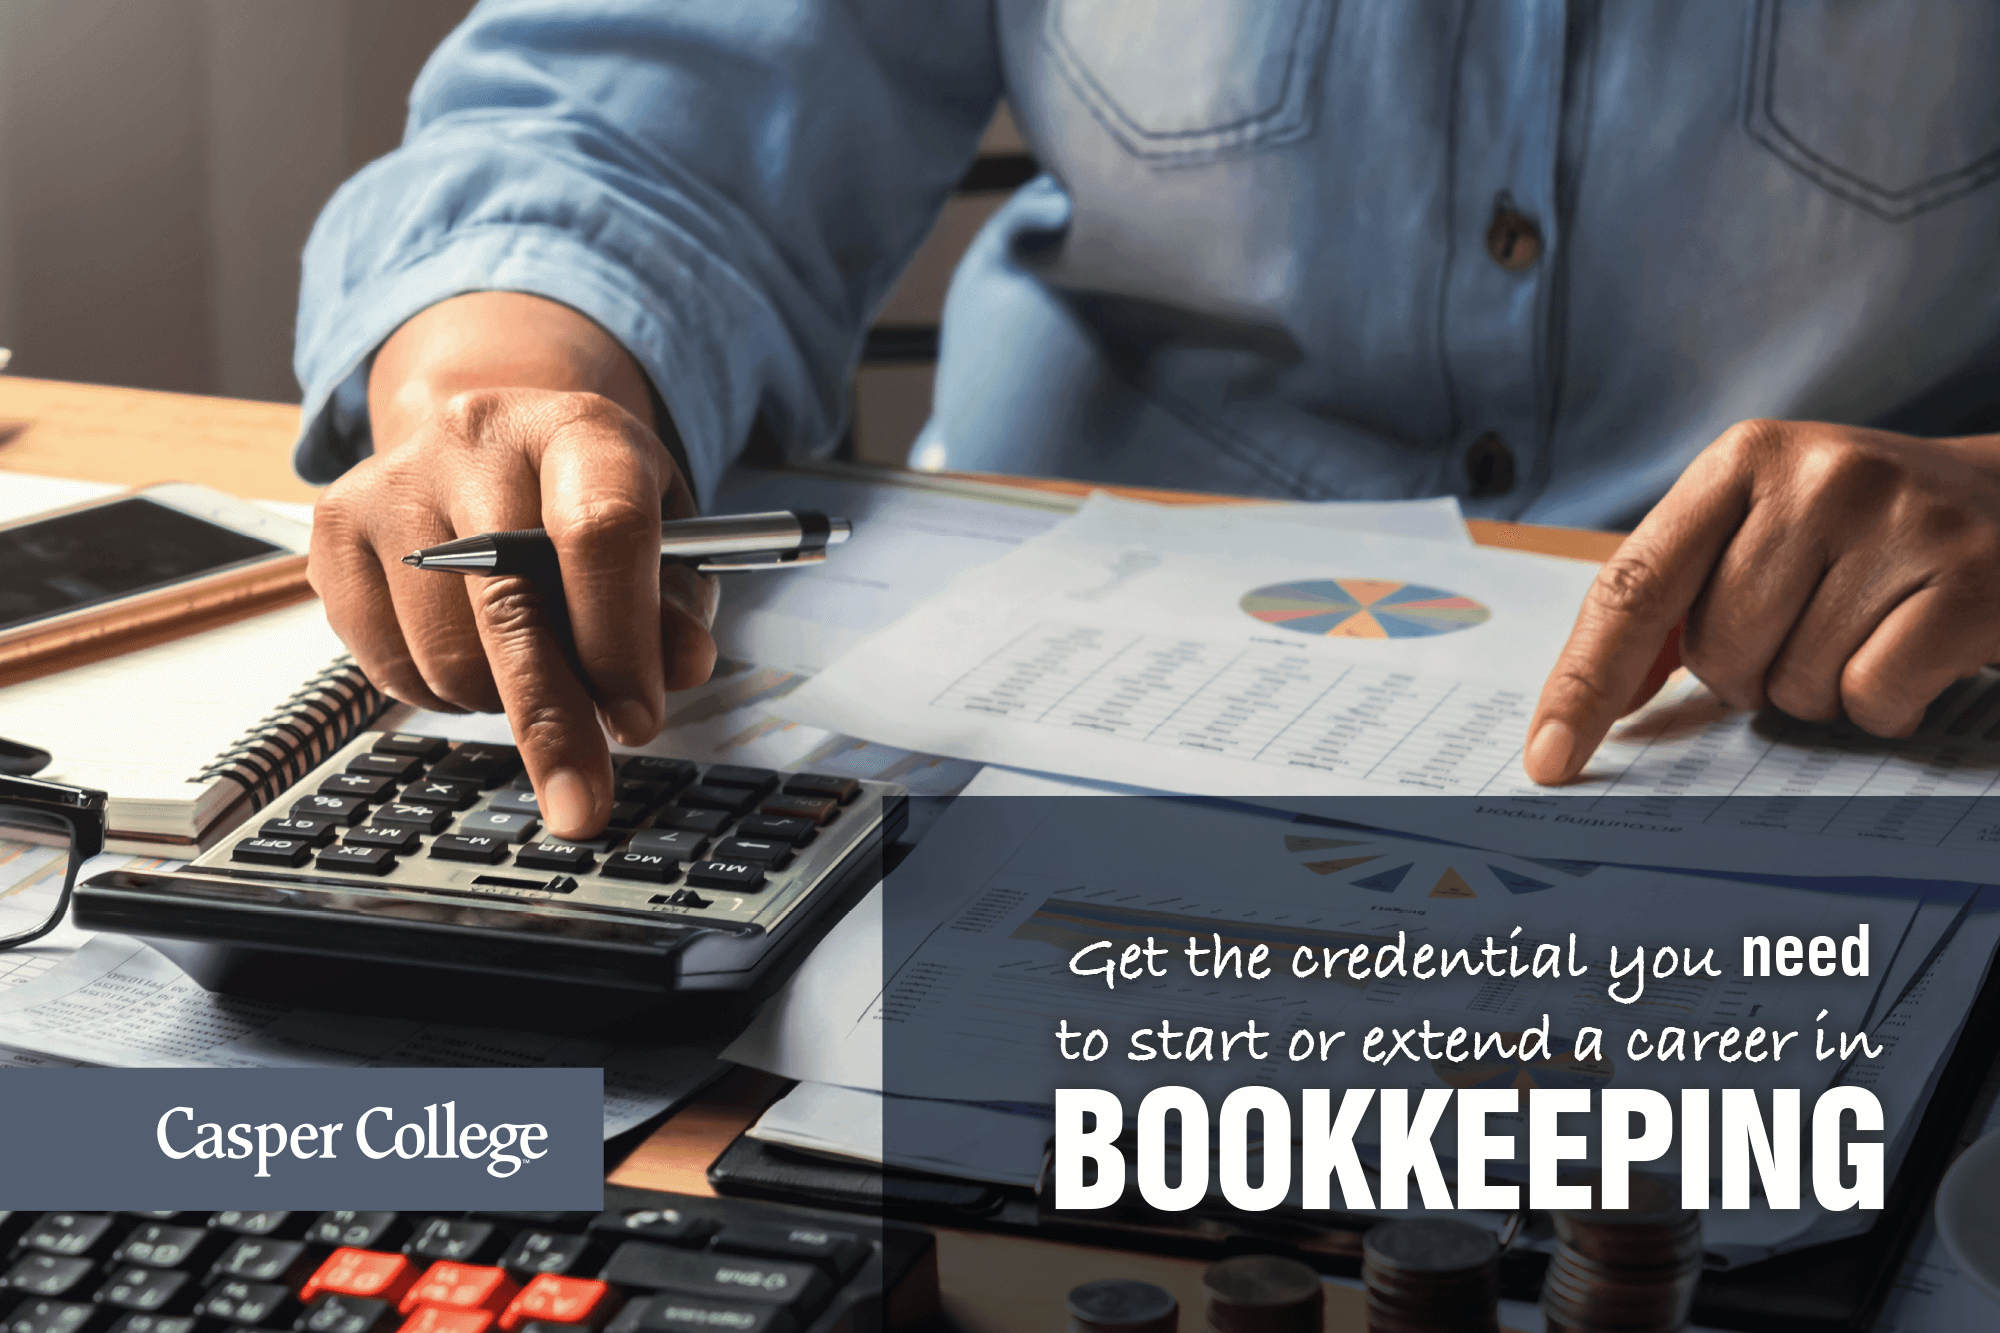 Photo of hands with a calculator and papers with the word "Bookkeeping."